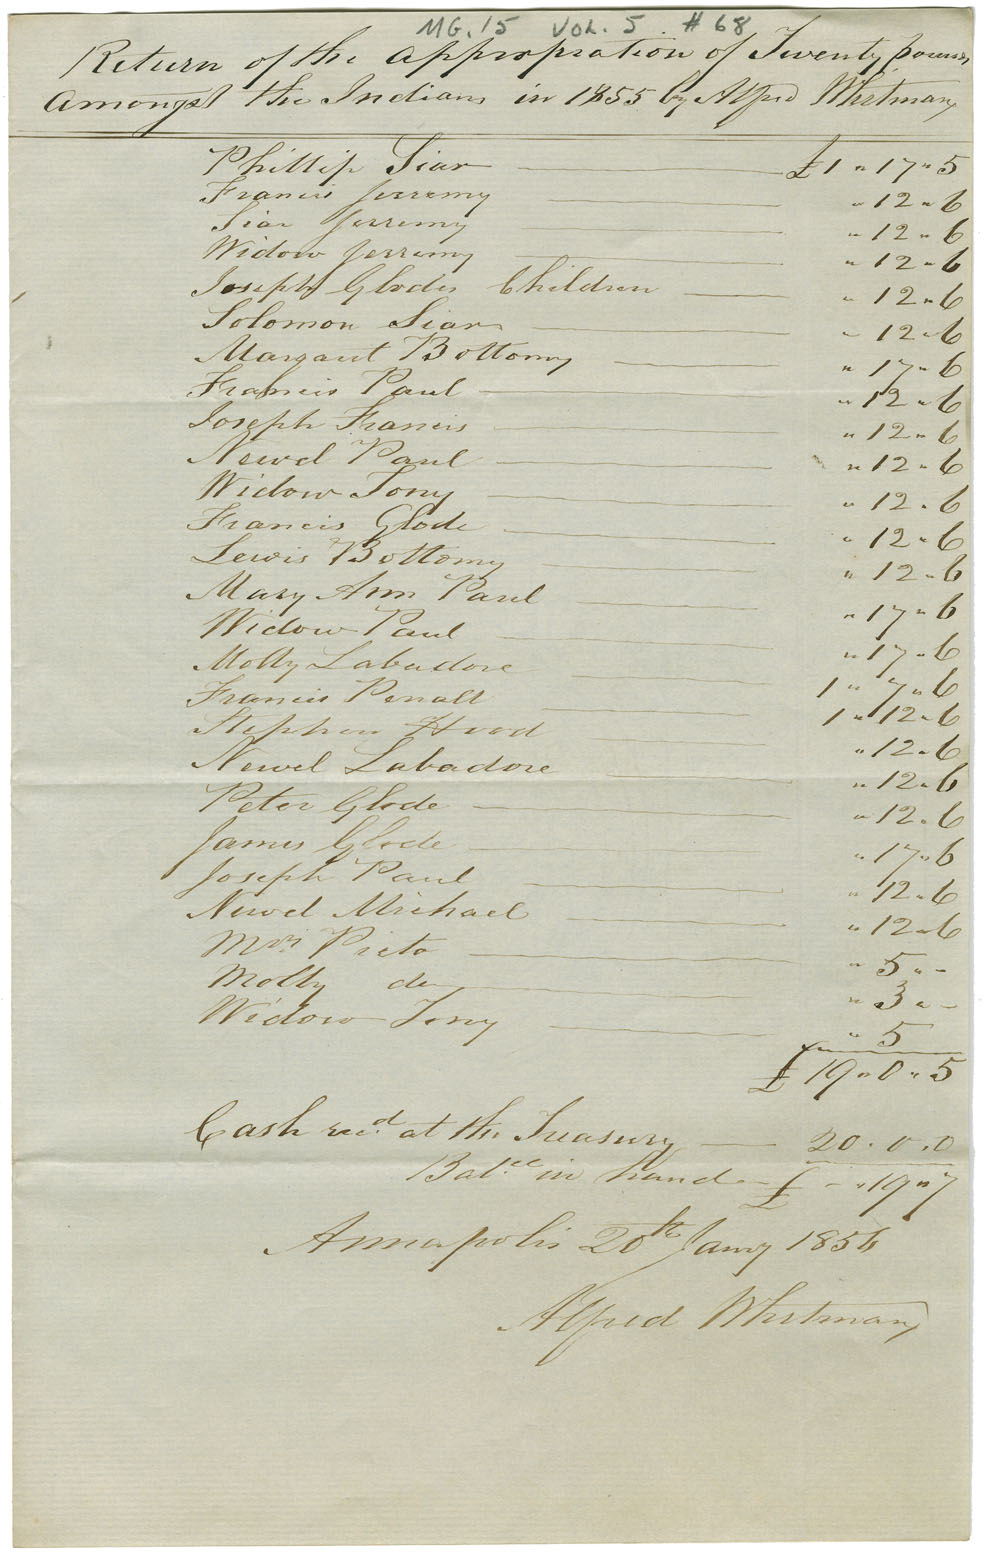 Account of the appropriation of money for Annapolis Mi'kmaq by Alfred Whitman.